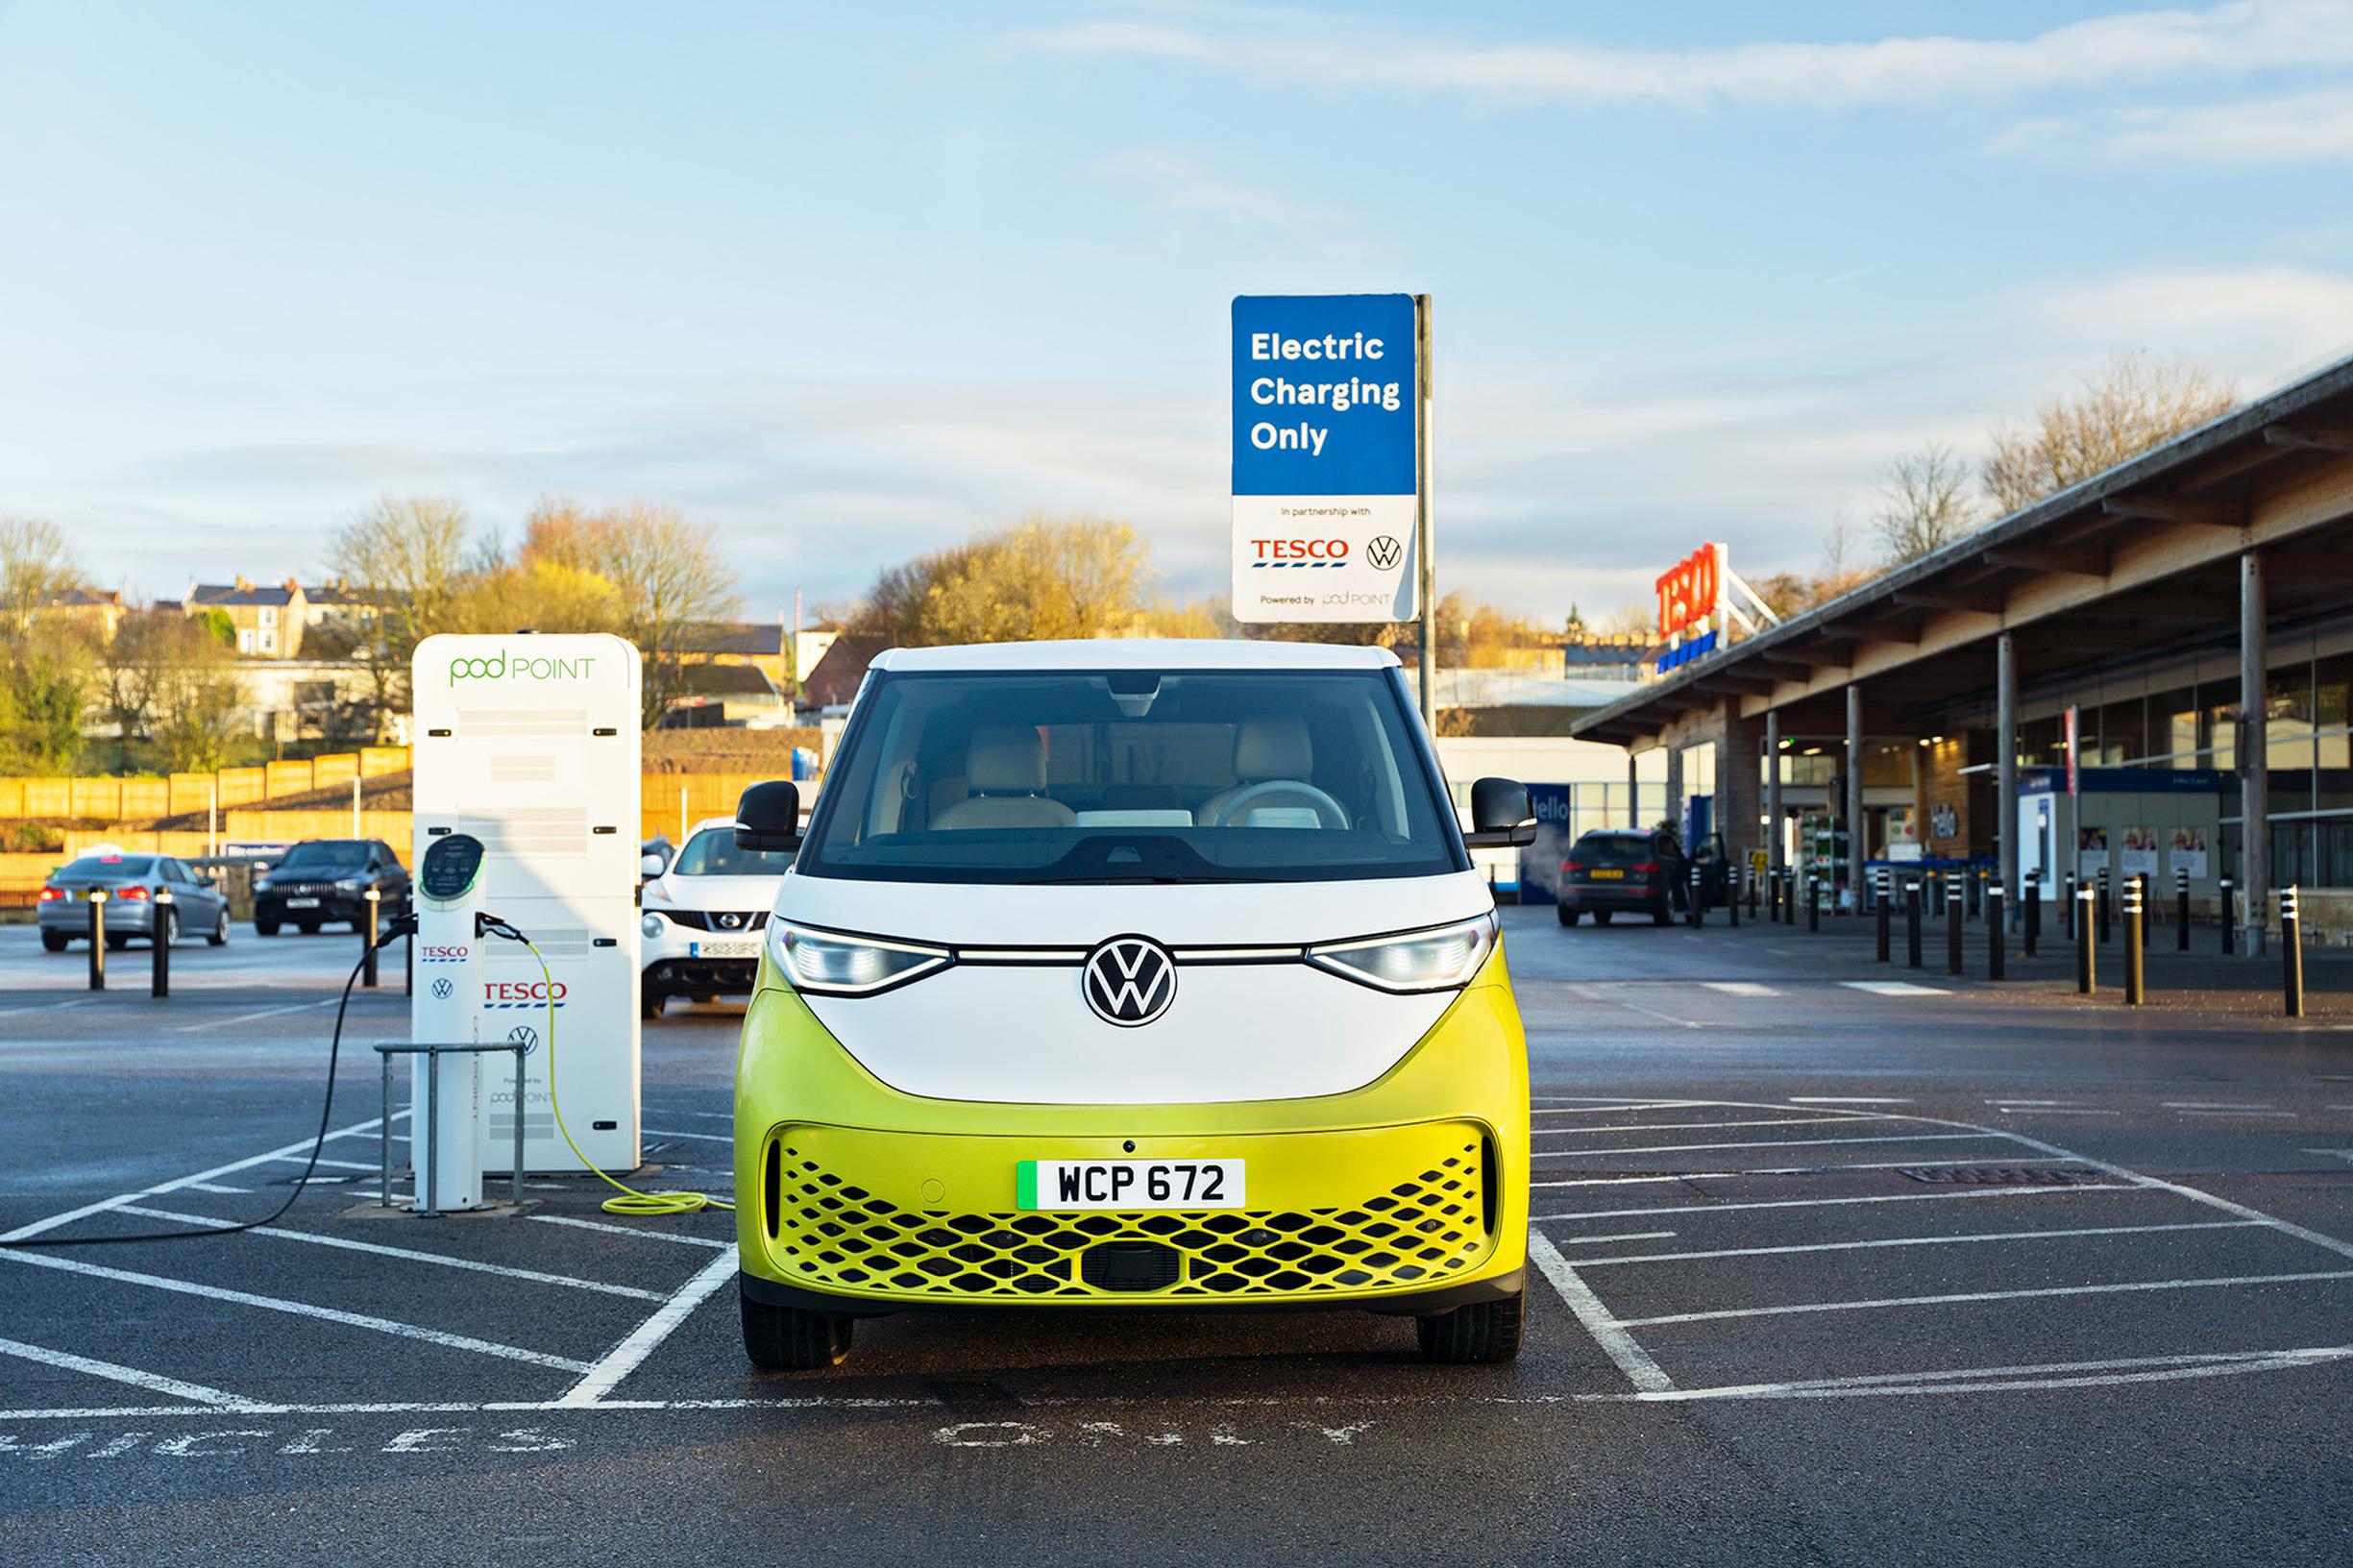 Pod Point installs 500th Tesco store with Volkswagen EV charging